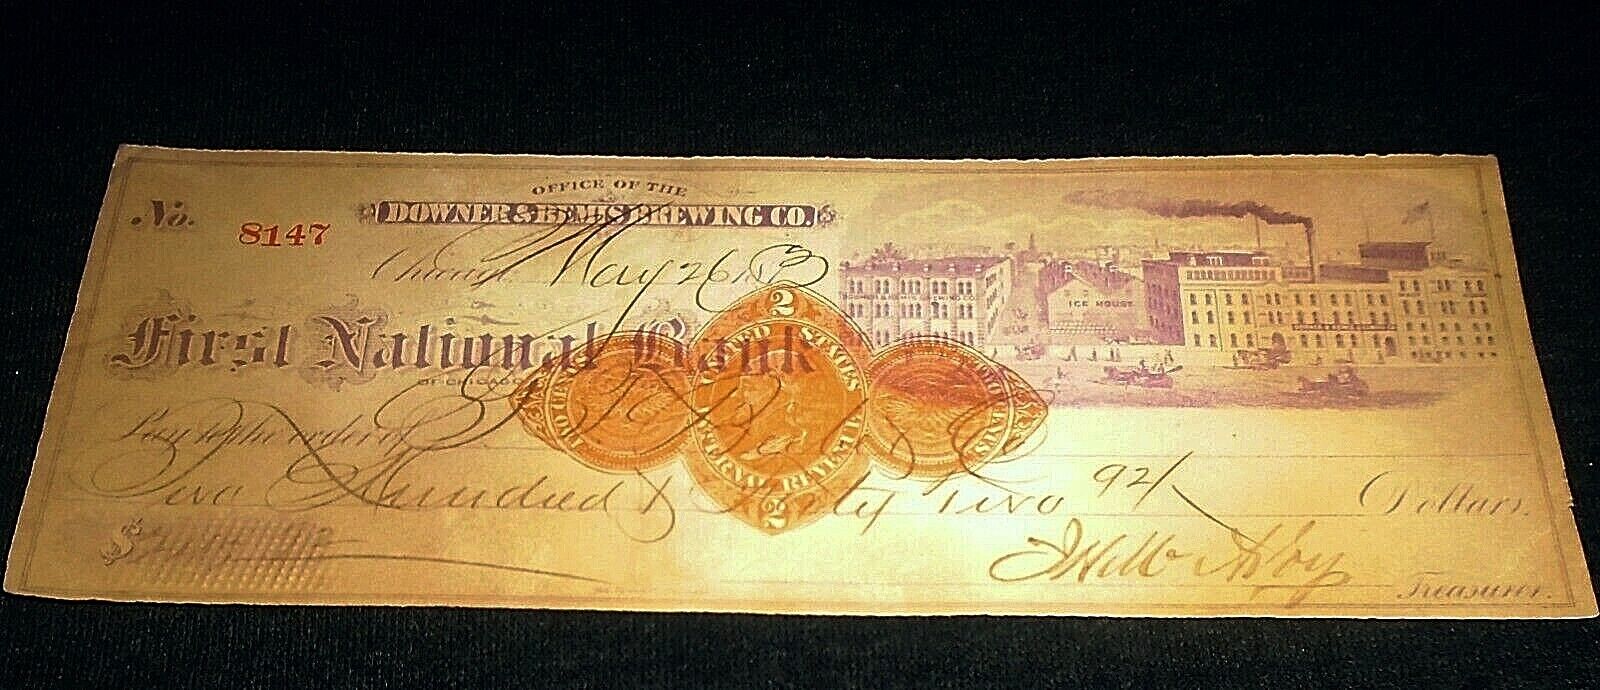 RARE 1875 Pre Pro Downer & Bemis Brewery, Chicago Illinois Bankers Check